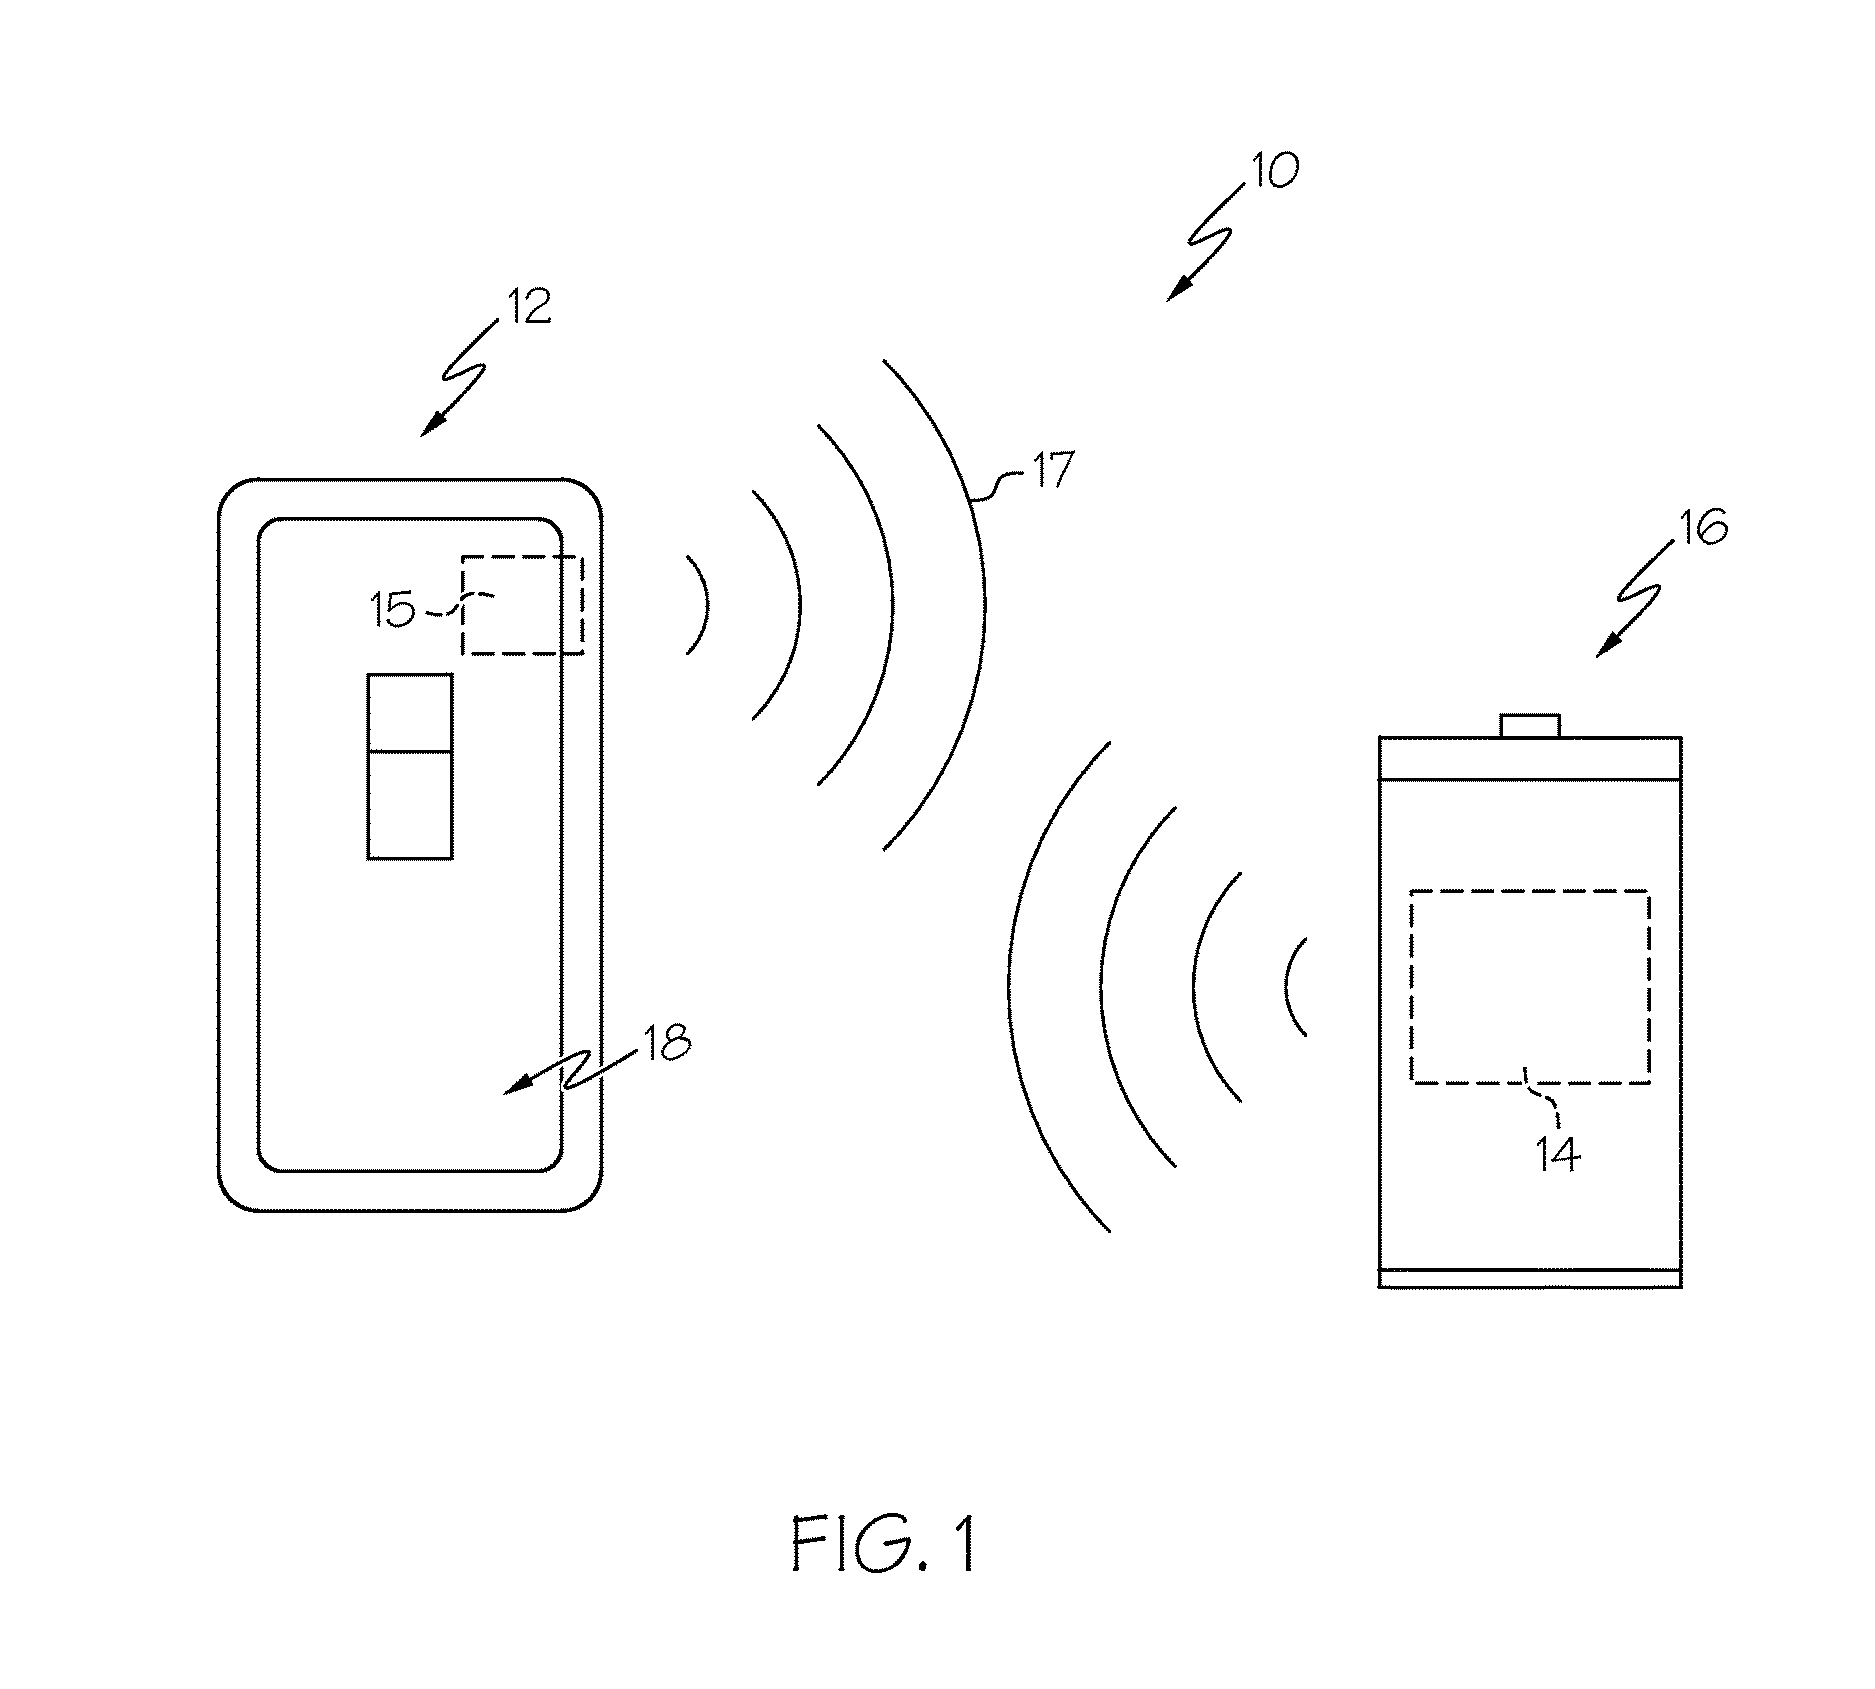 Remote sensing of remaining battery capacity using on-battery circuitry